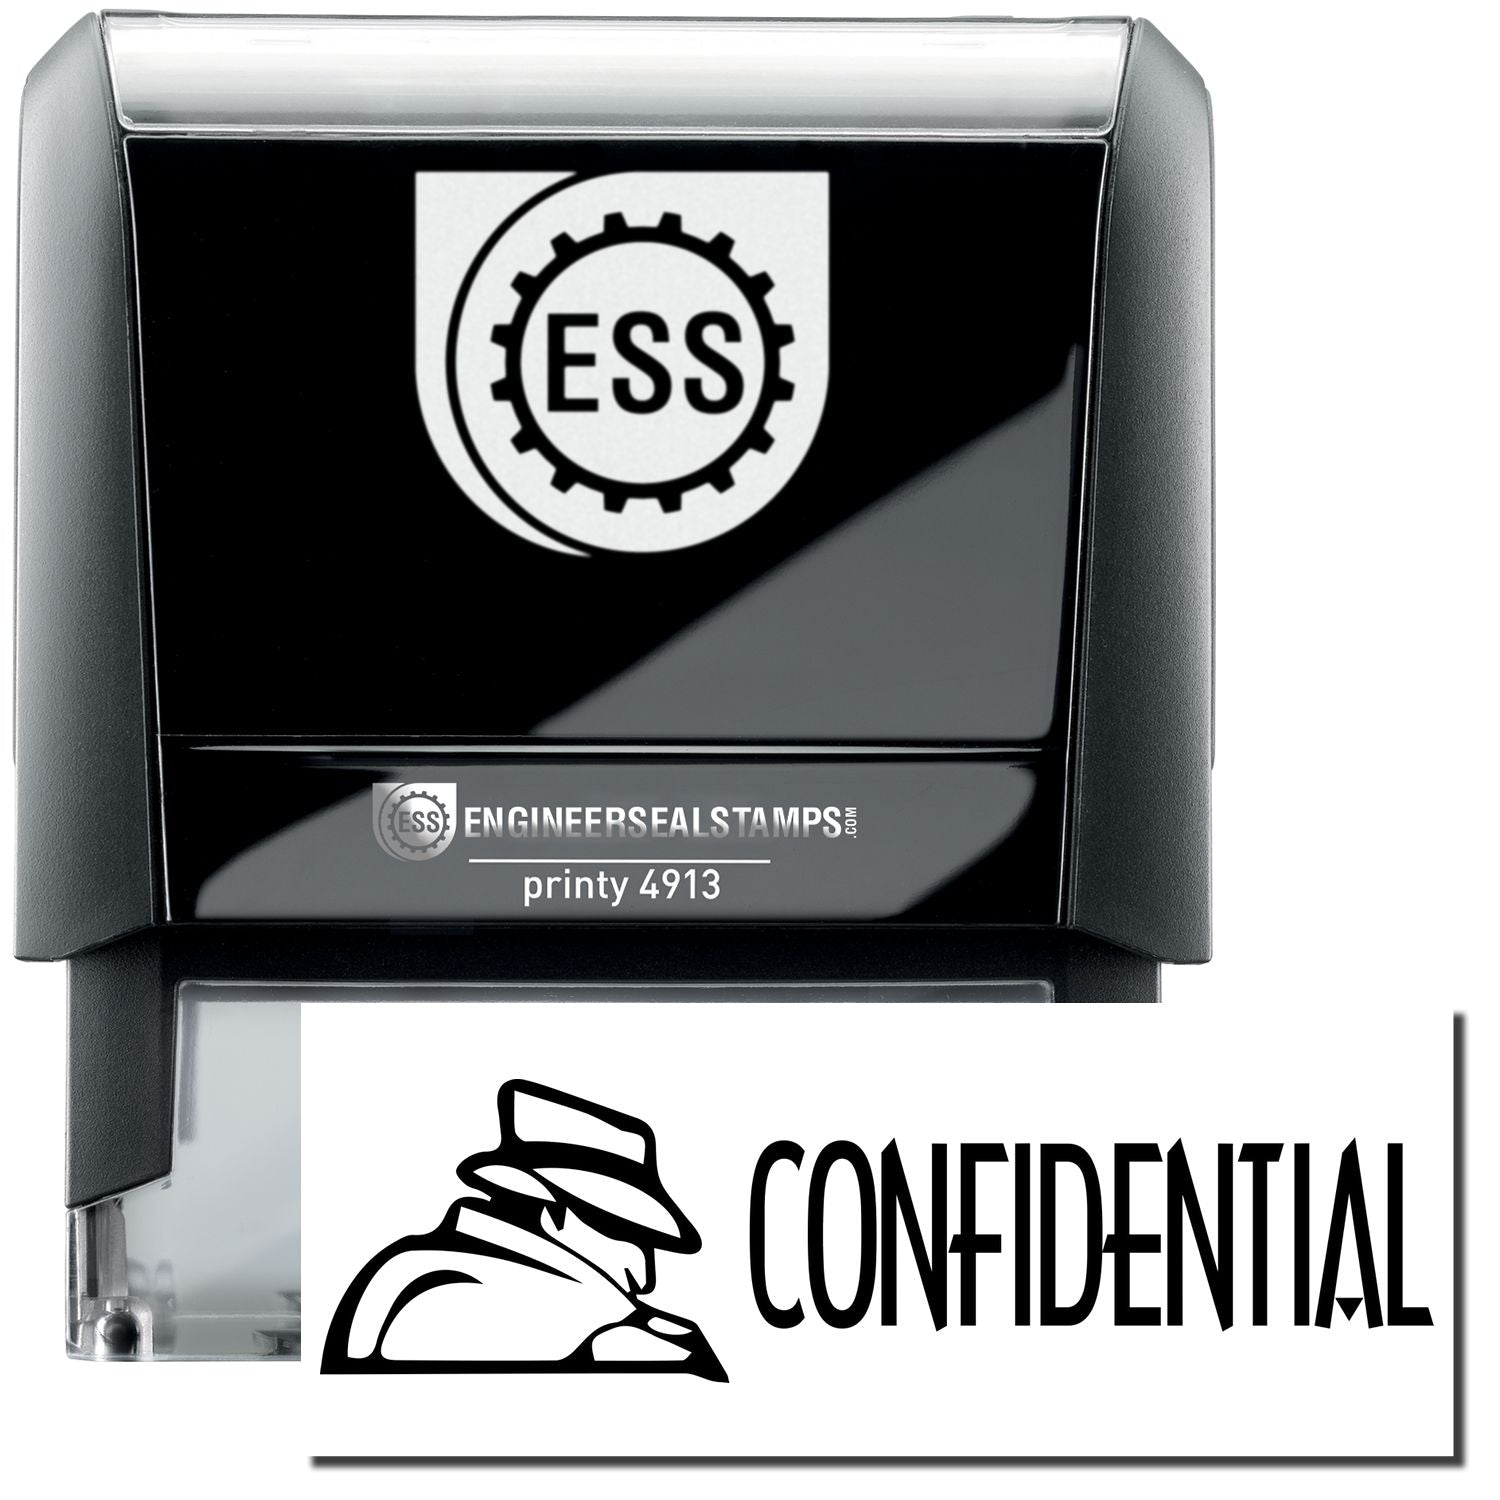 A self-inking stamp with a stamped image showing how the text "CONFIDENTIAL" in a large font with a logo is displayed by it after stamping.